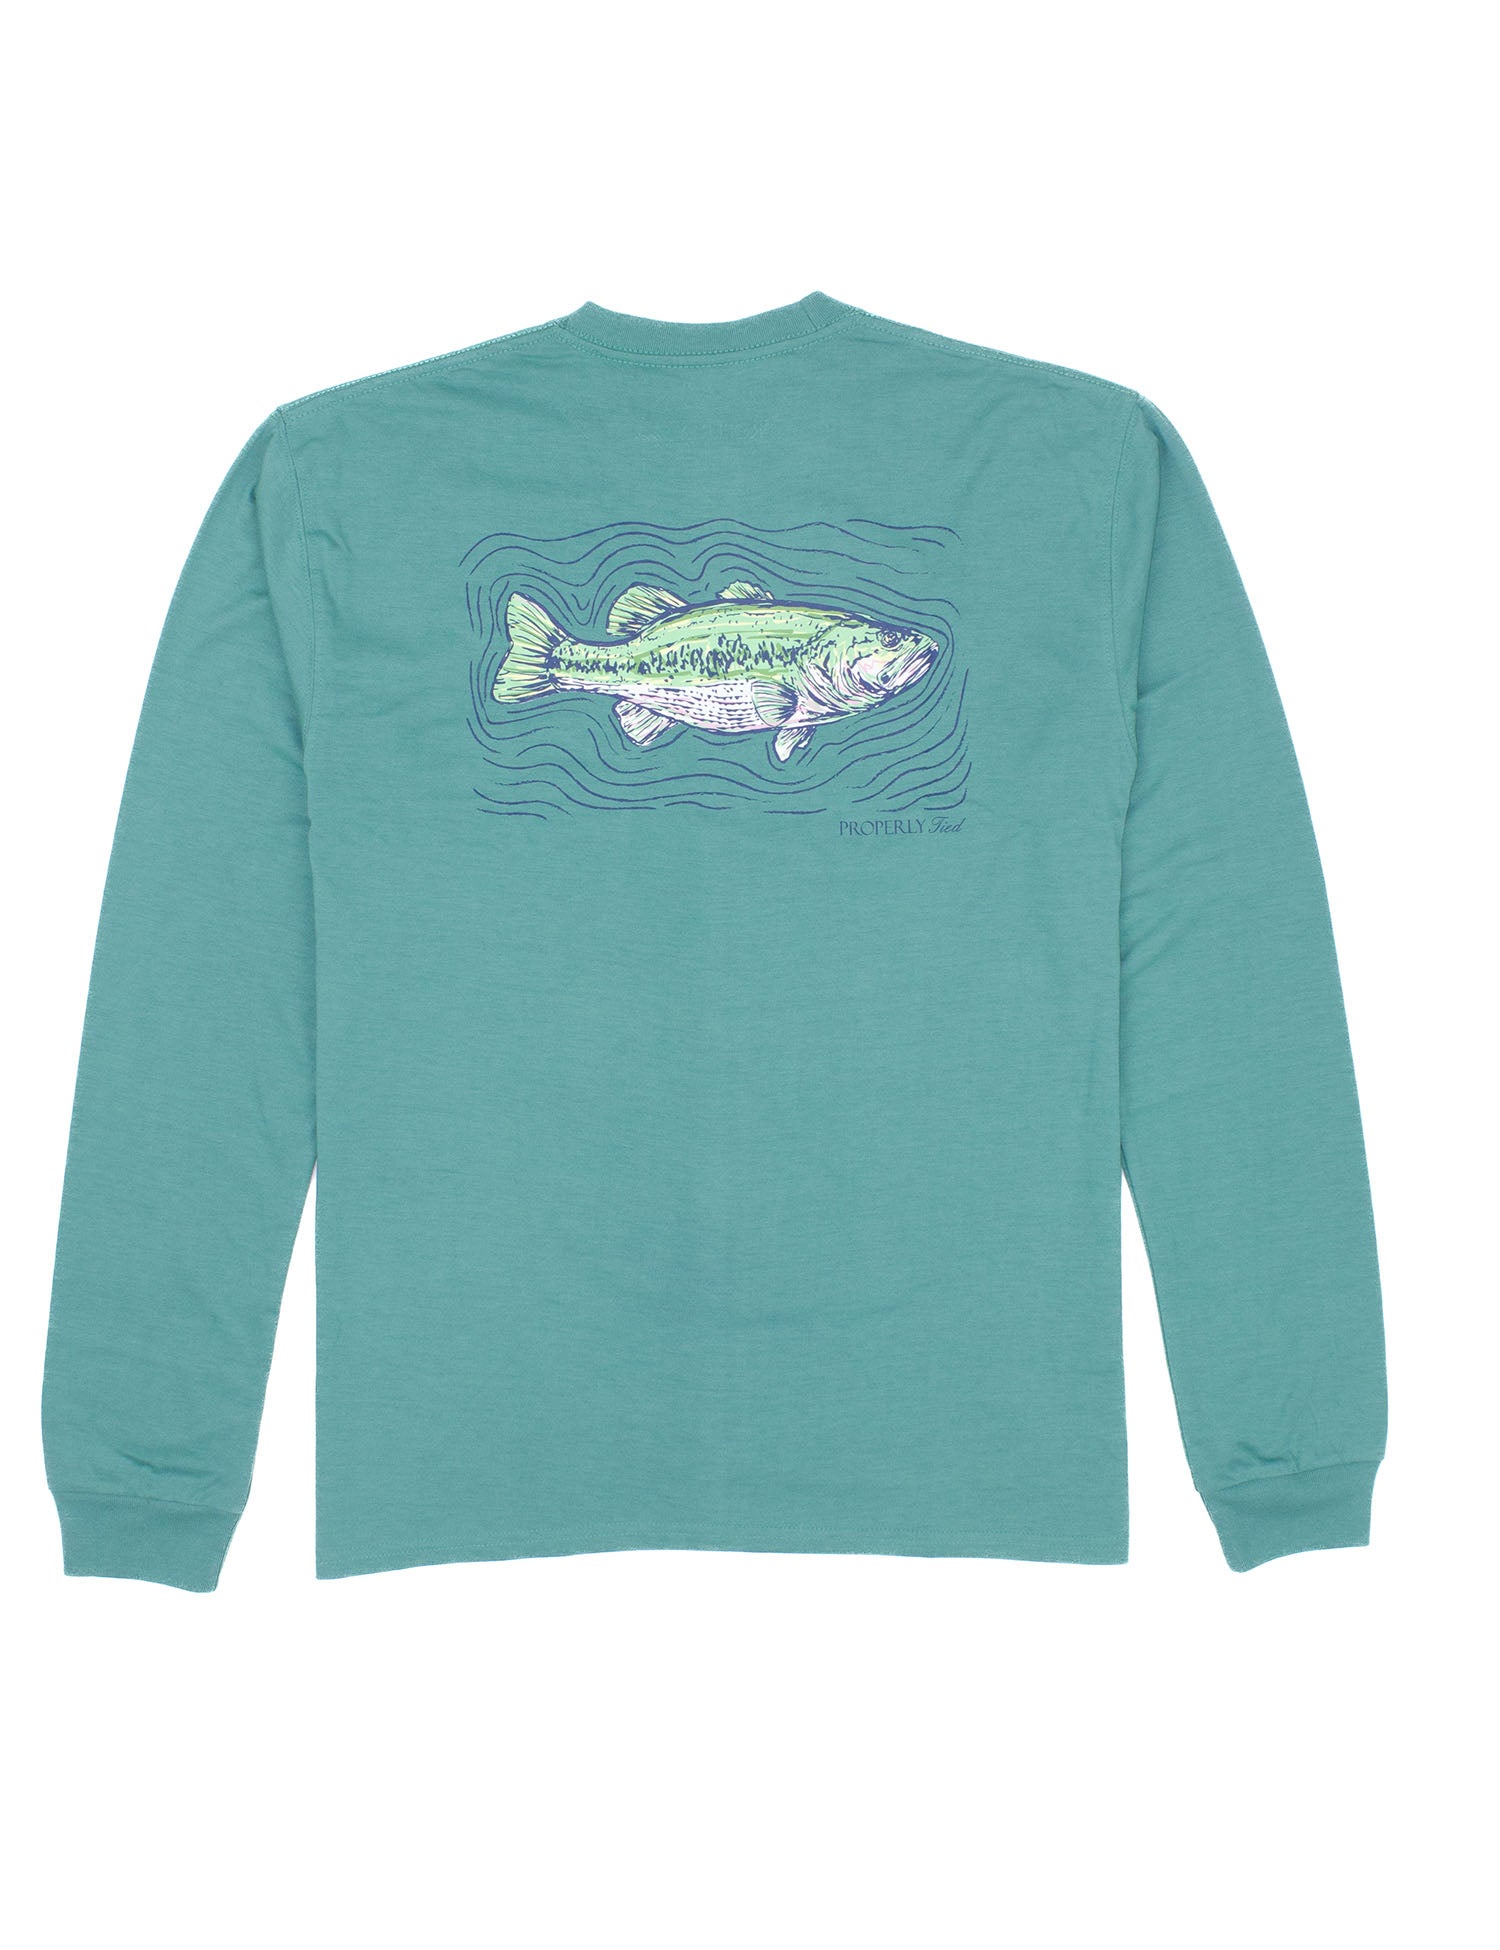 Spotted Bass LS Teal